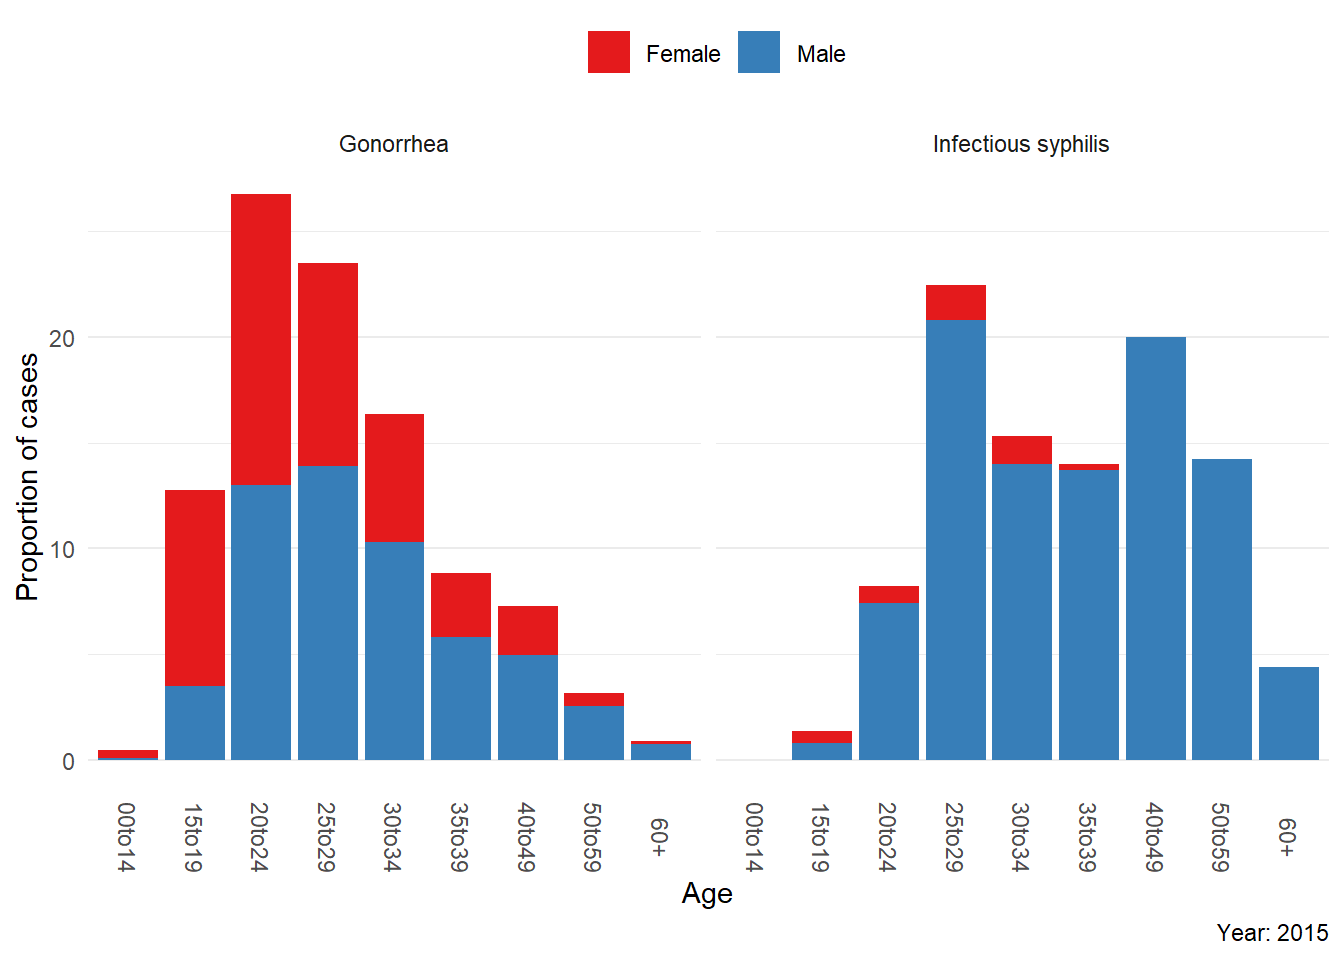 Propotion of cases in Alberta by disease by age and gender for **2015**.